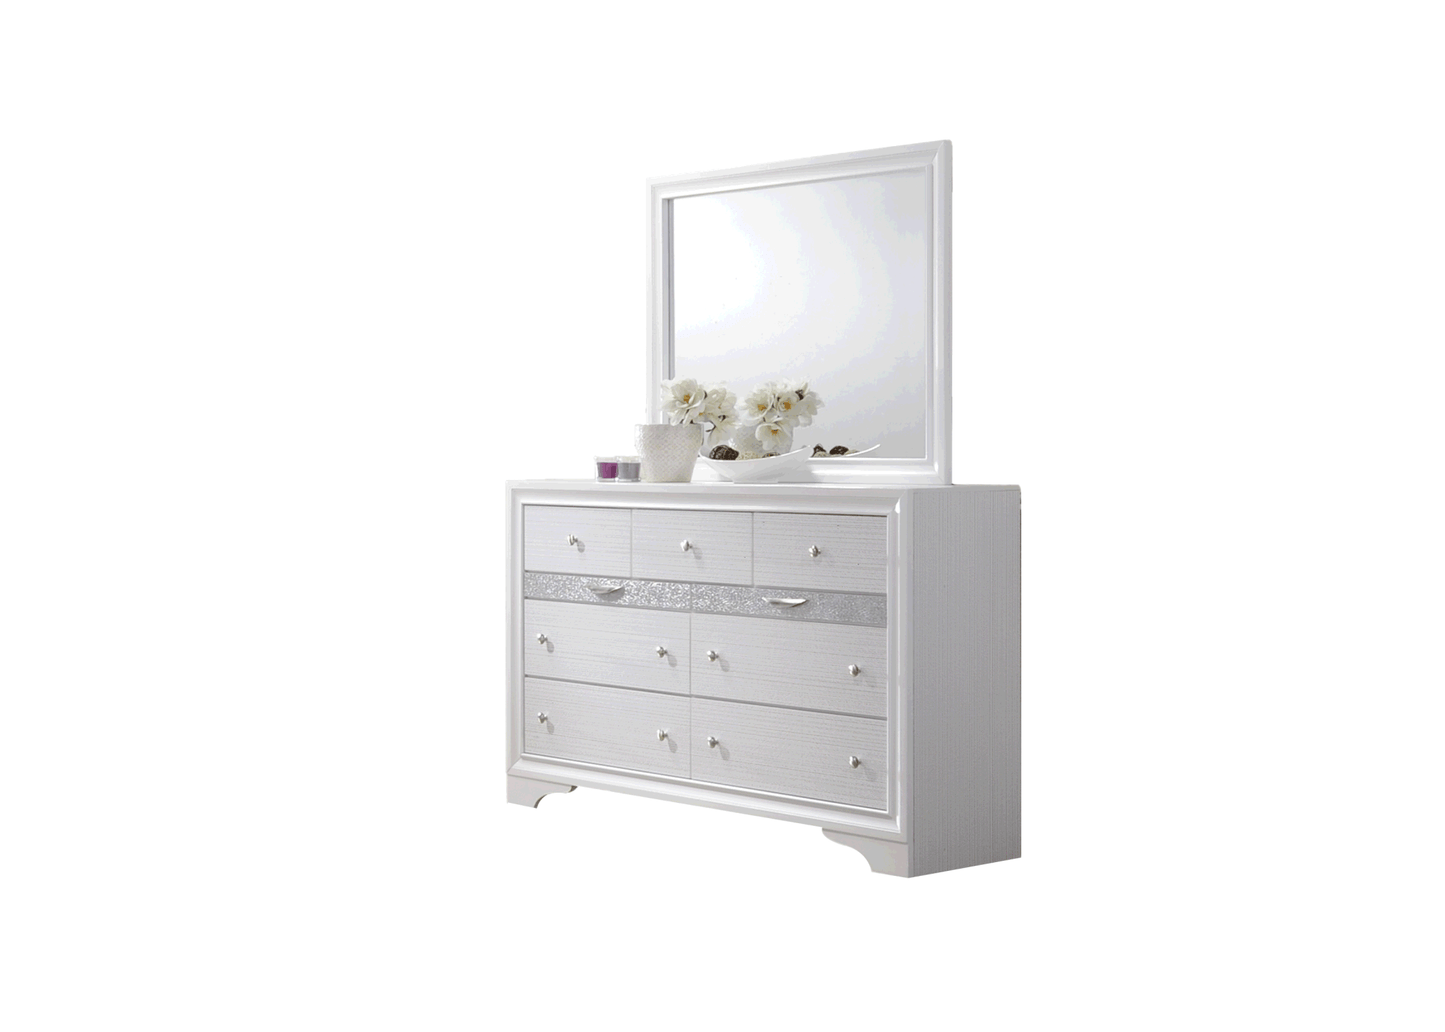 traditional matrix 7 drawer dresser in white made with wood